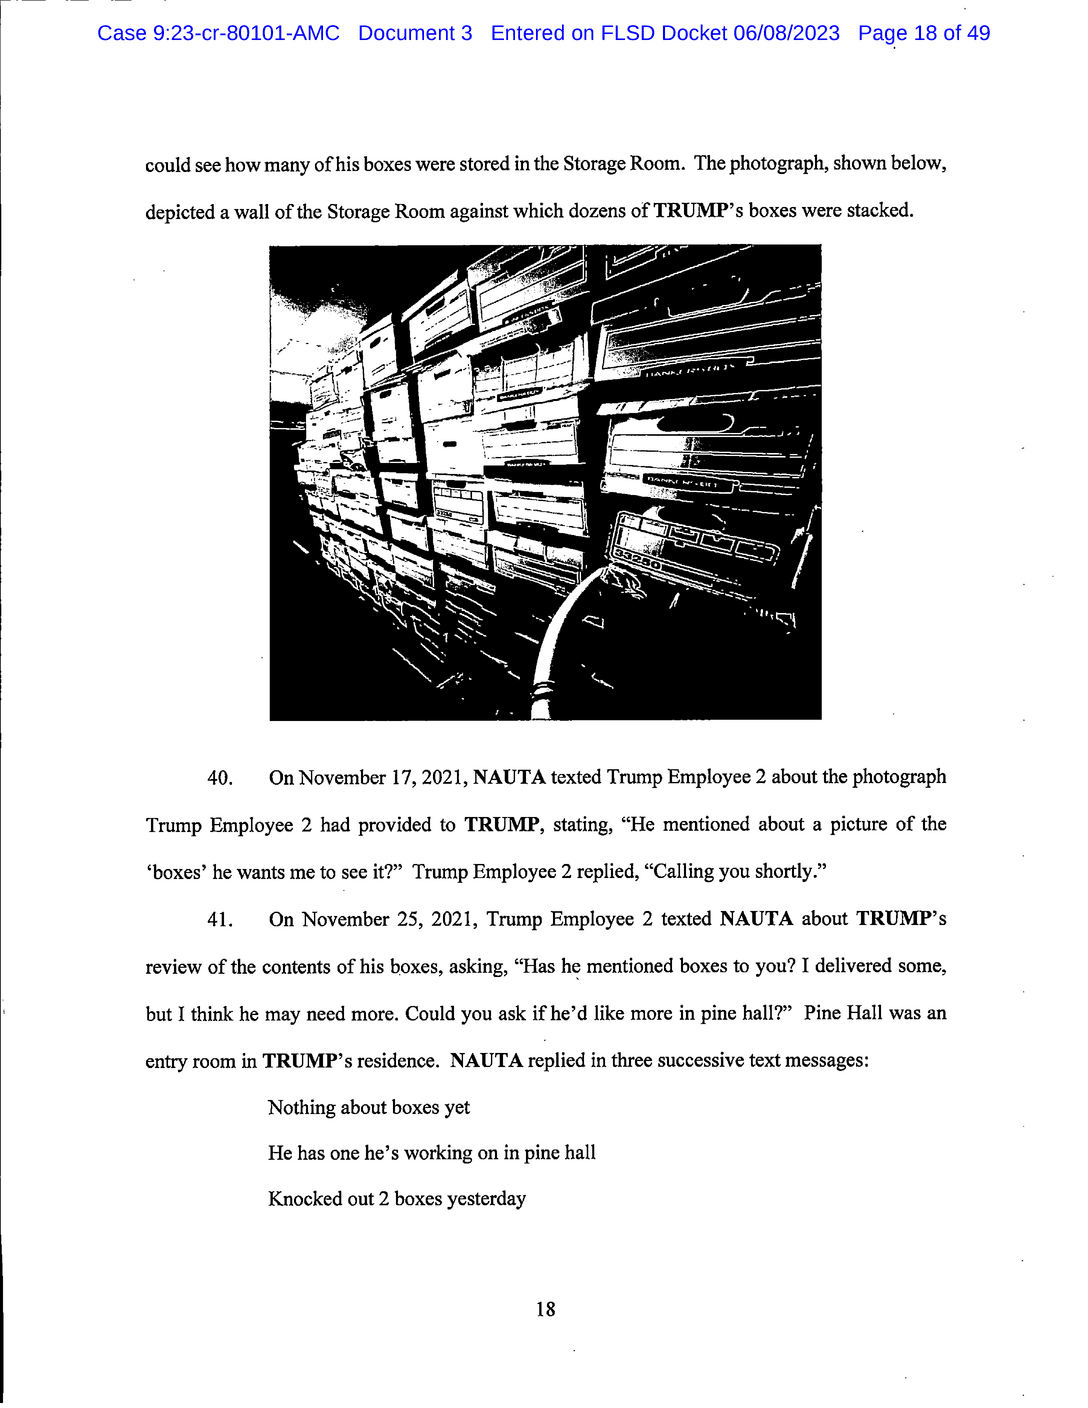 Page 18 of Donald Trump Classified Documents Indictment PDF document.